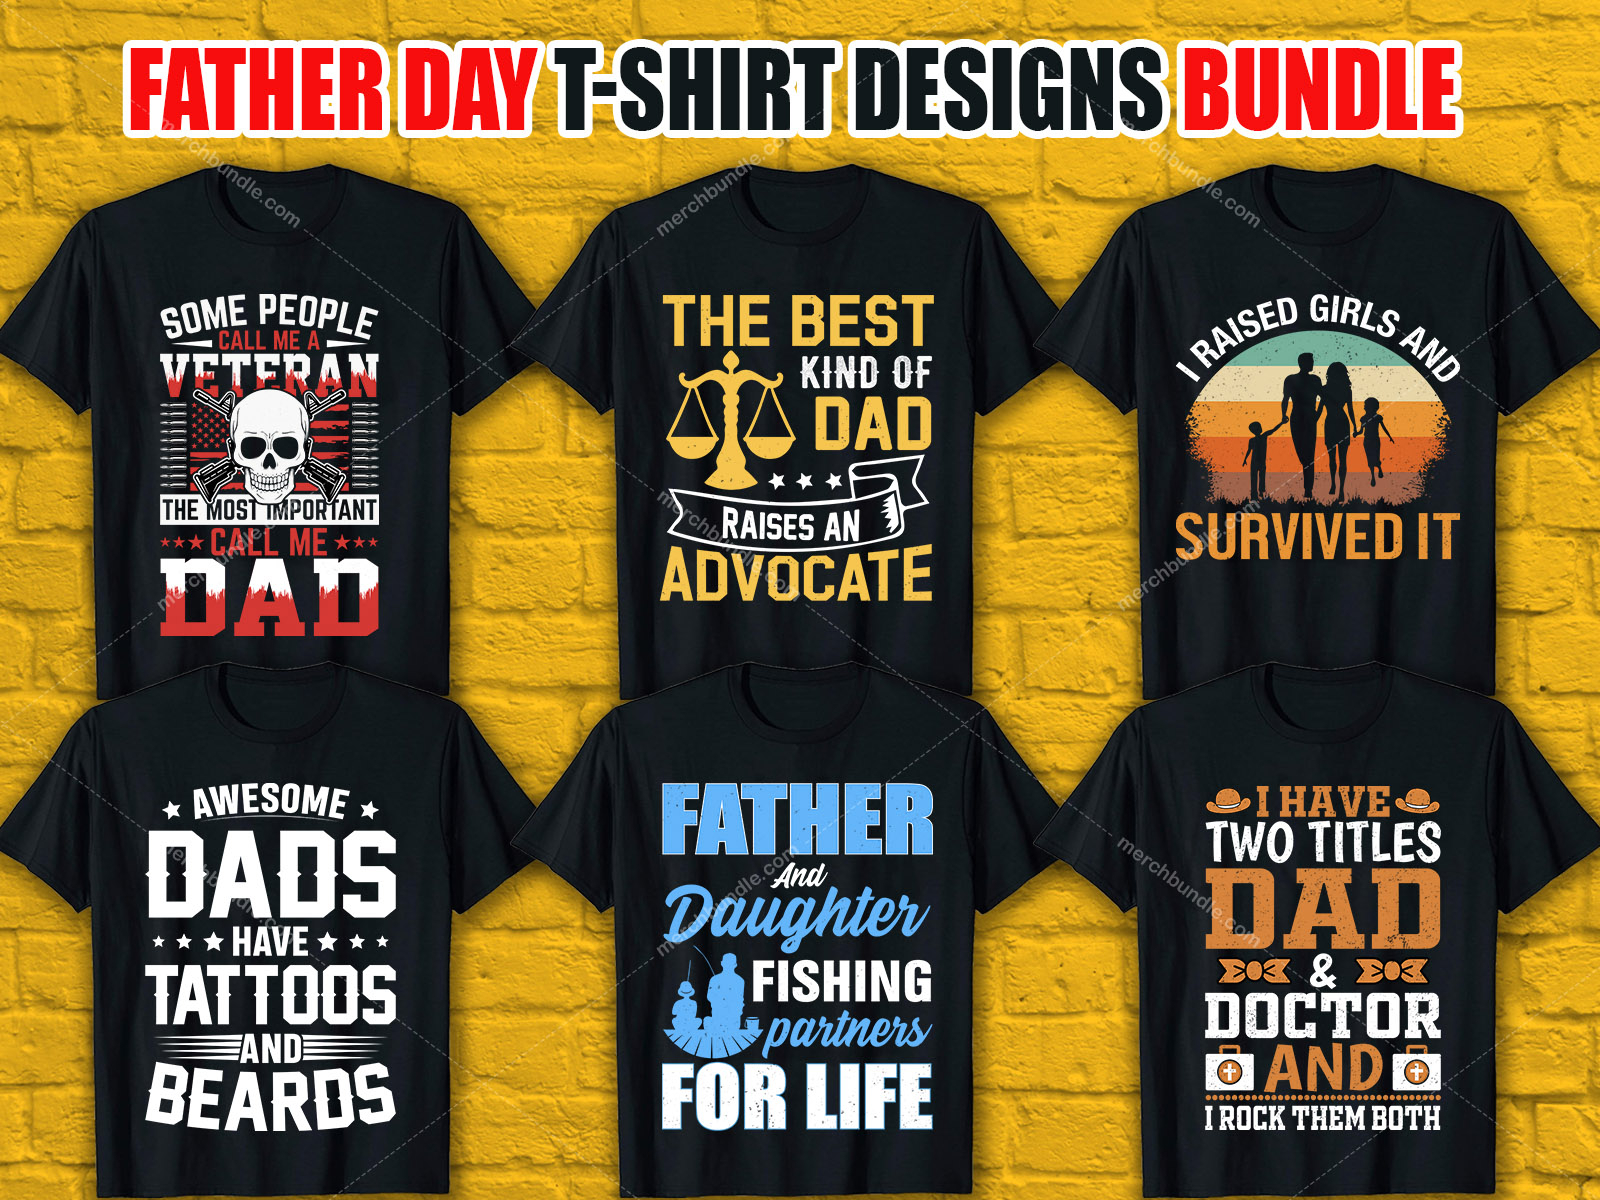 Father Day T Shirt Designs Bundle by Tofazzel Hossen on Dribbble